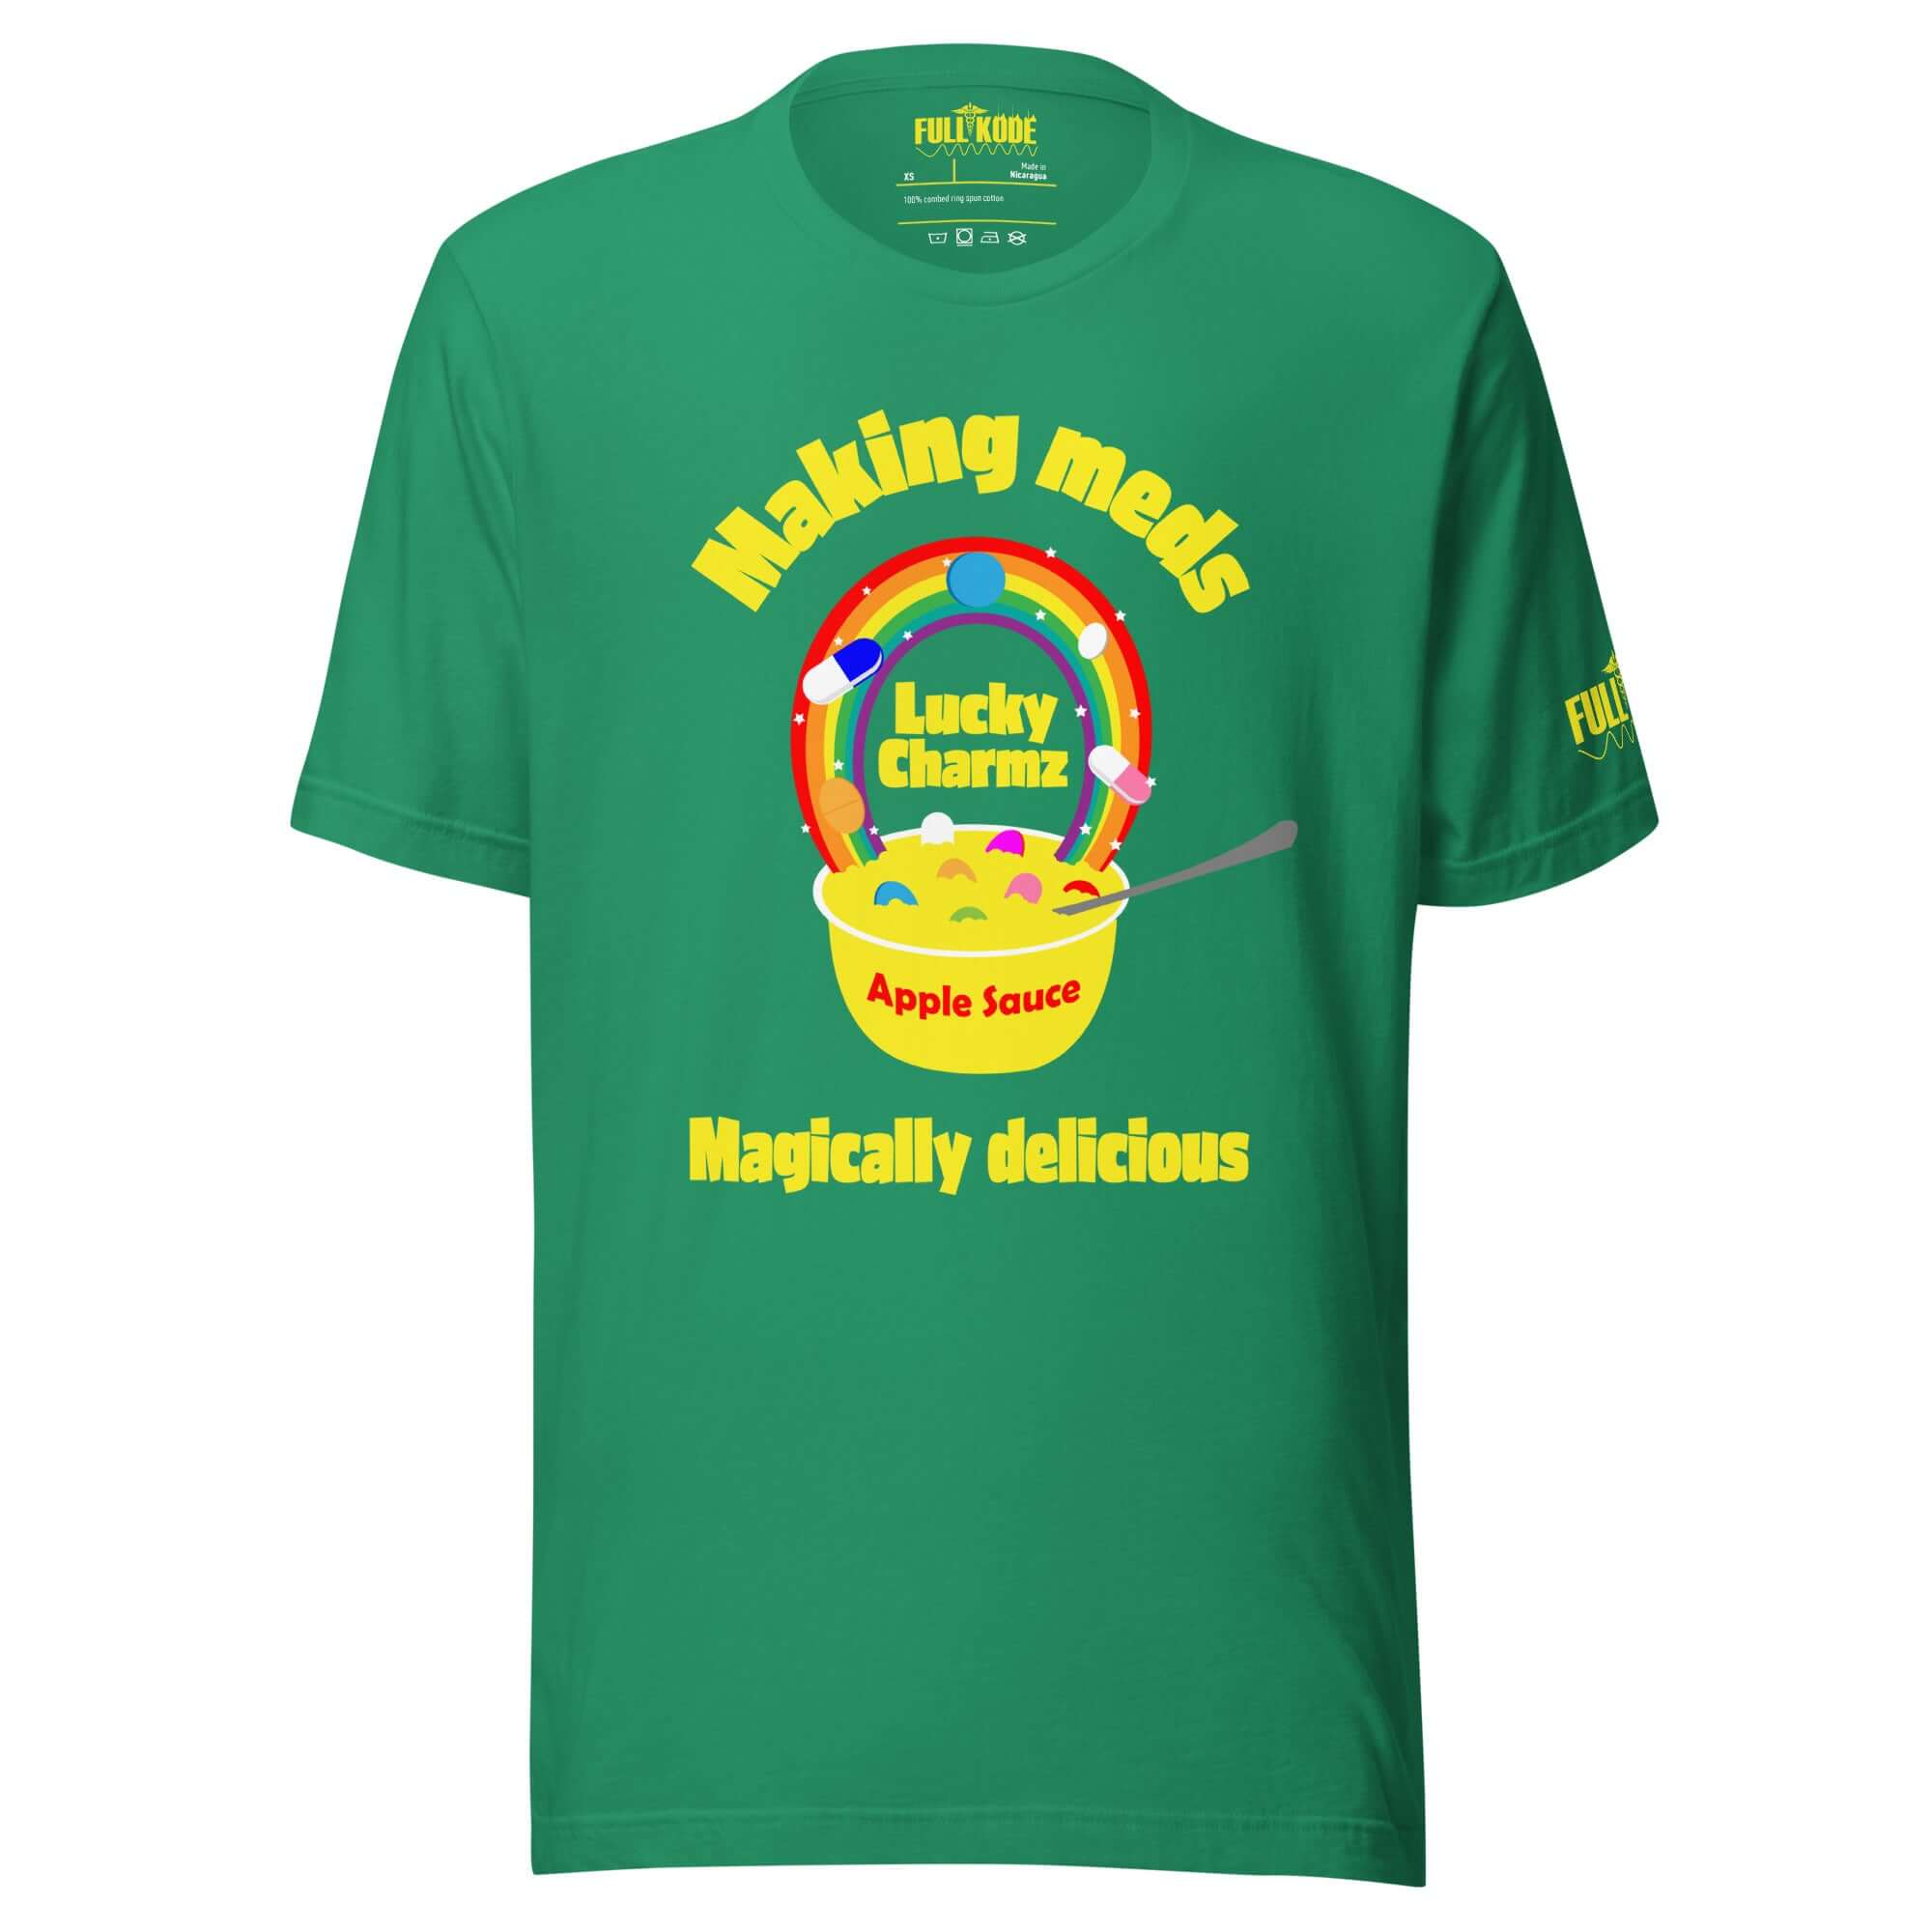 Lucky charmz, making meds magically delicious in apple sauce t-shirt for nurses.